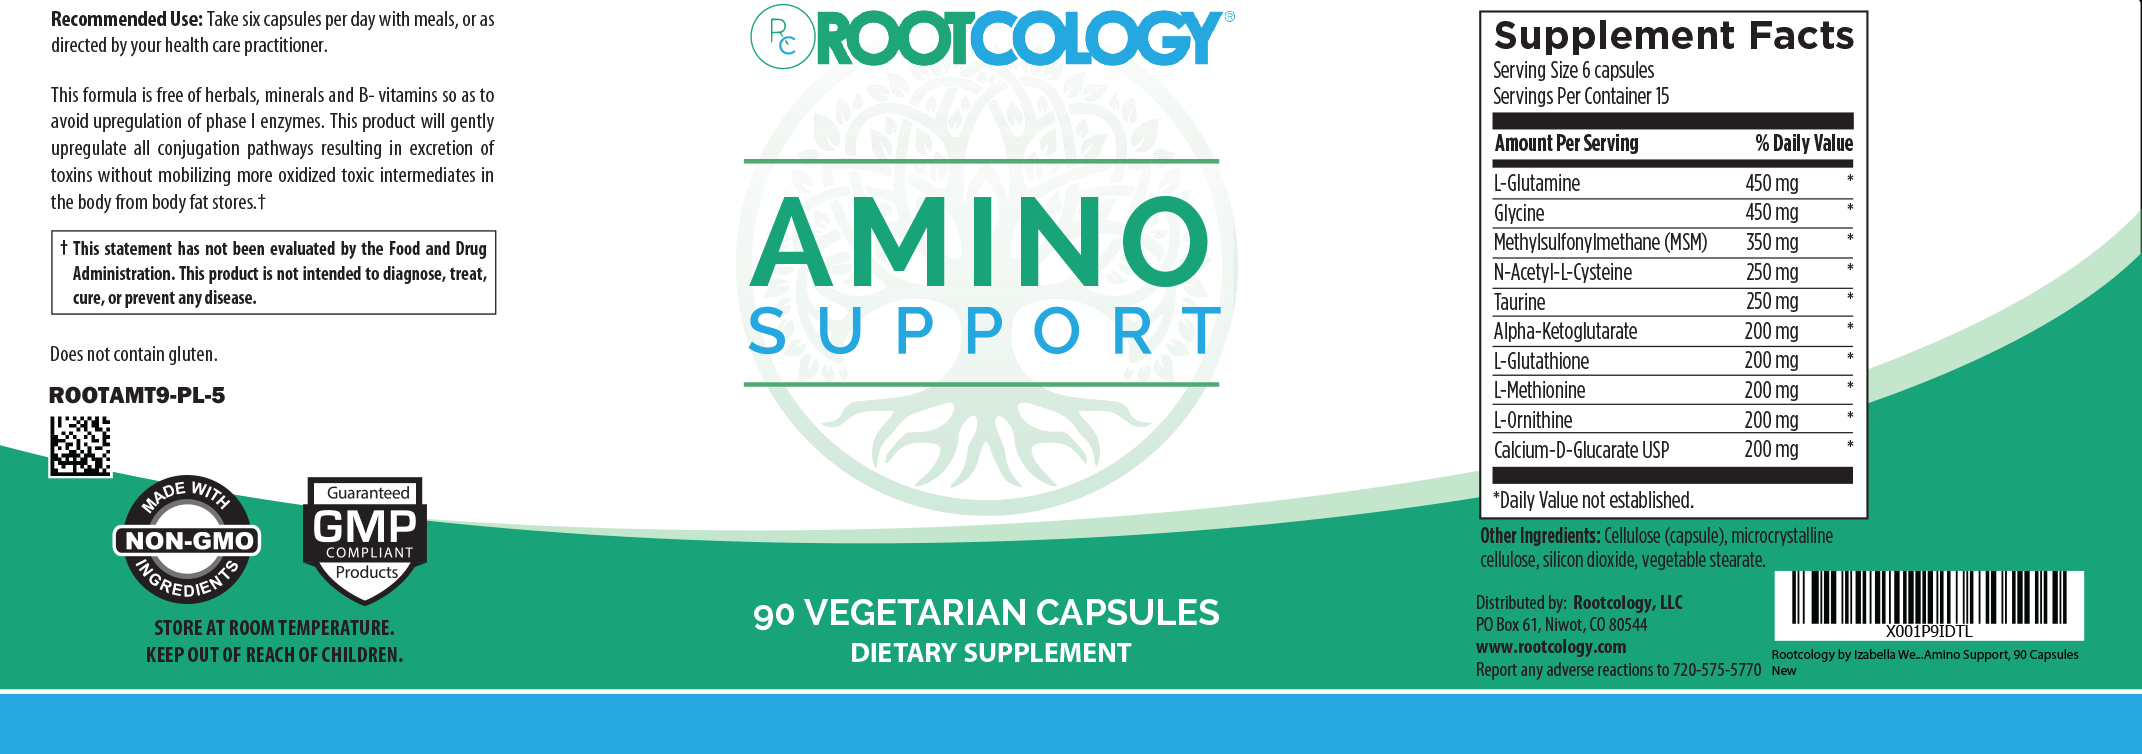 Amino Support - Rootcology